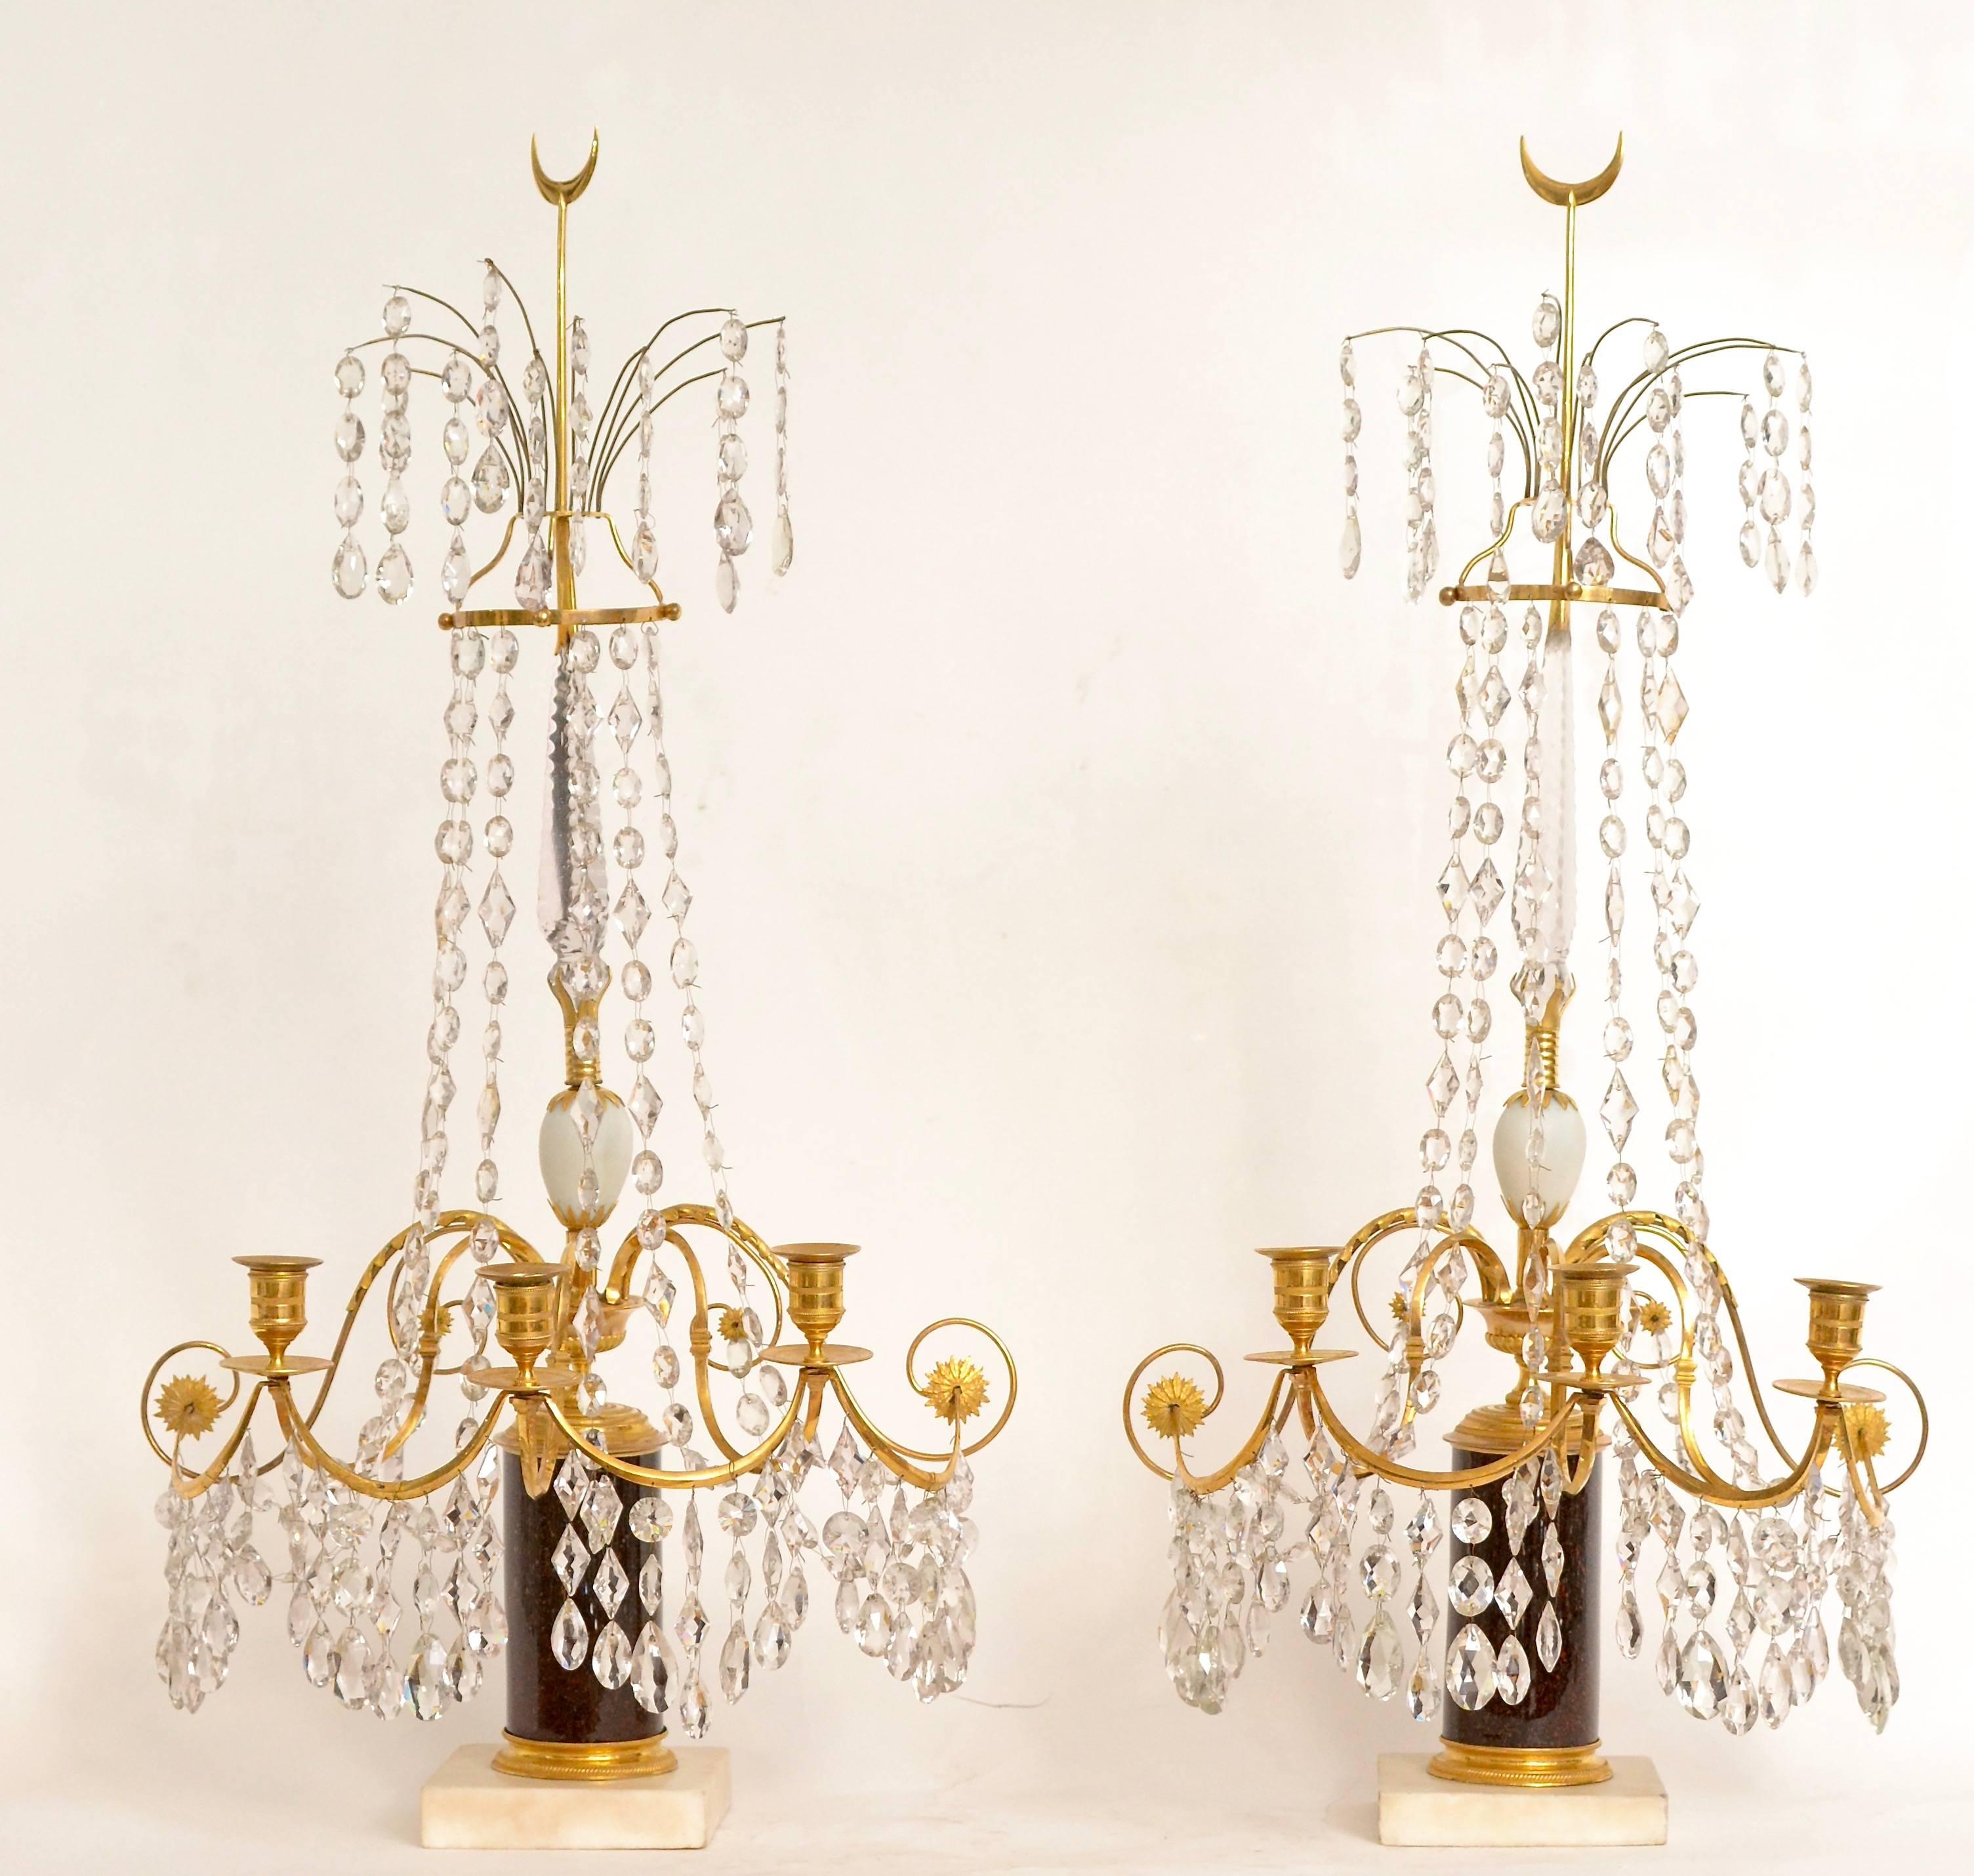 A pair of Swedish 18th century Gustavian crystal and gilt bronze candelabra with white marble and faux porphyry bases. This is a rare model.